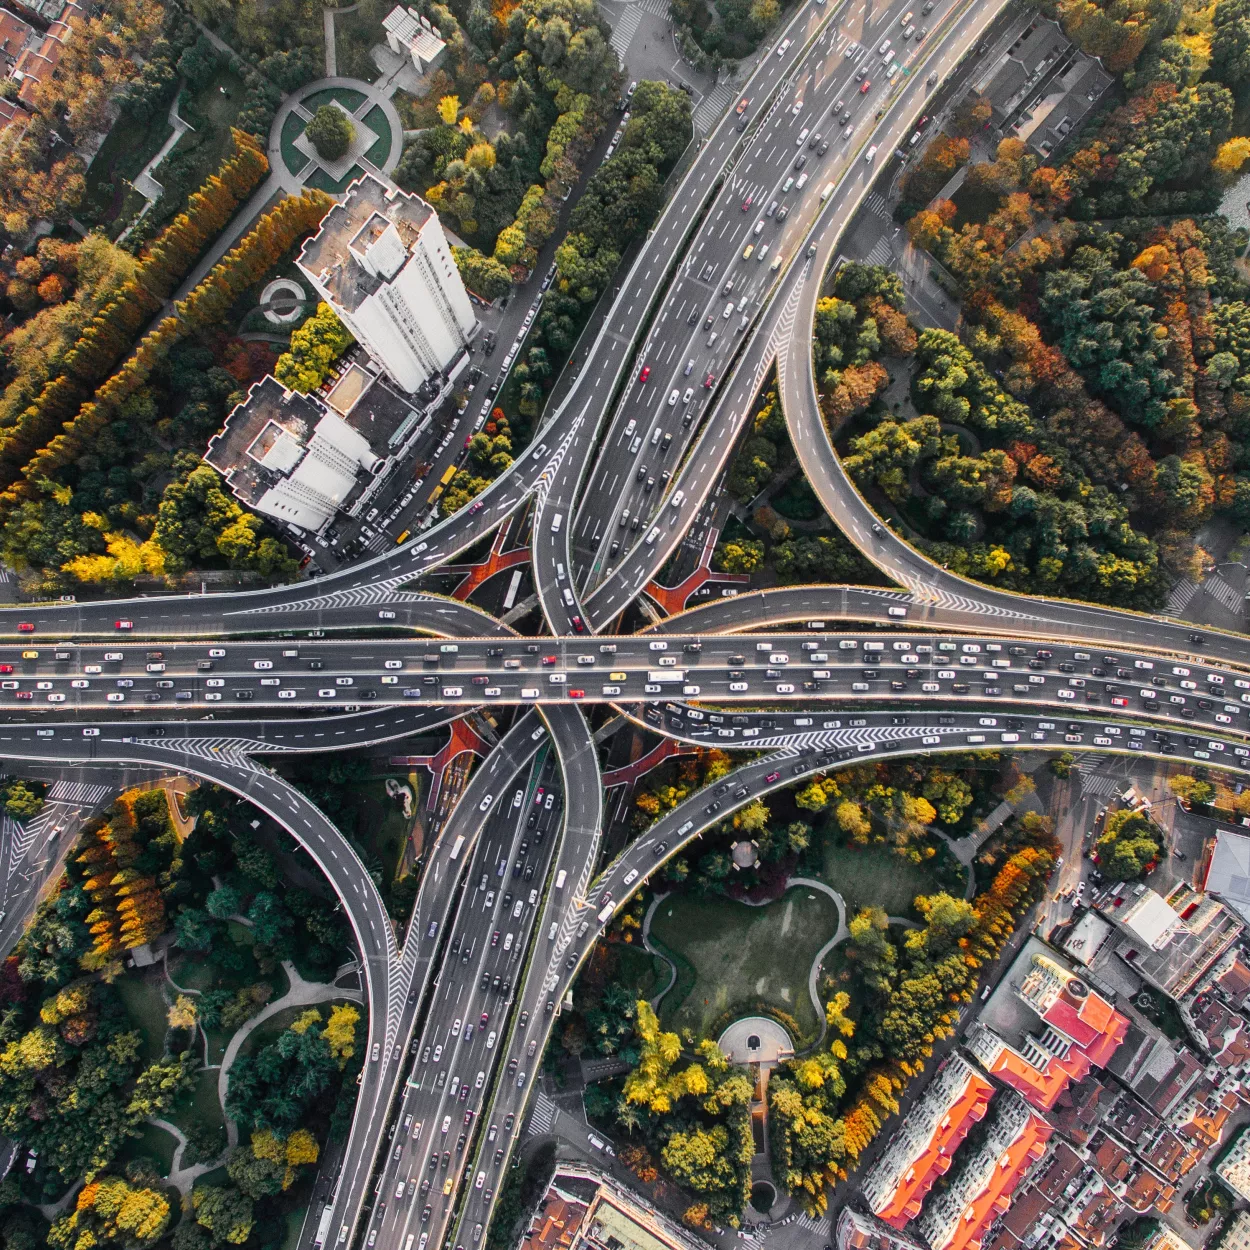 Aerial shot of roads crossing over